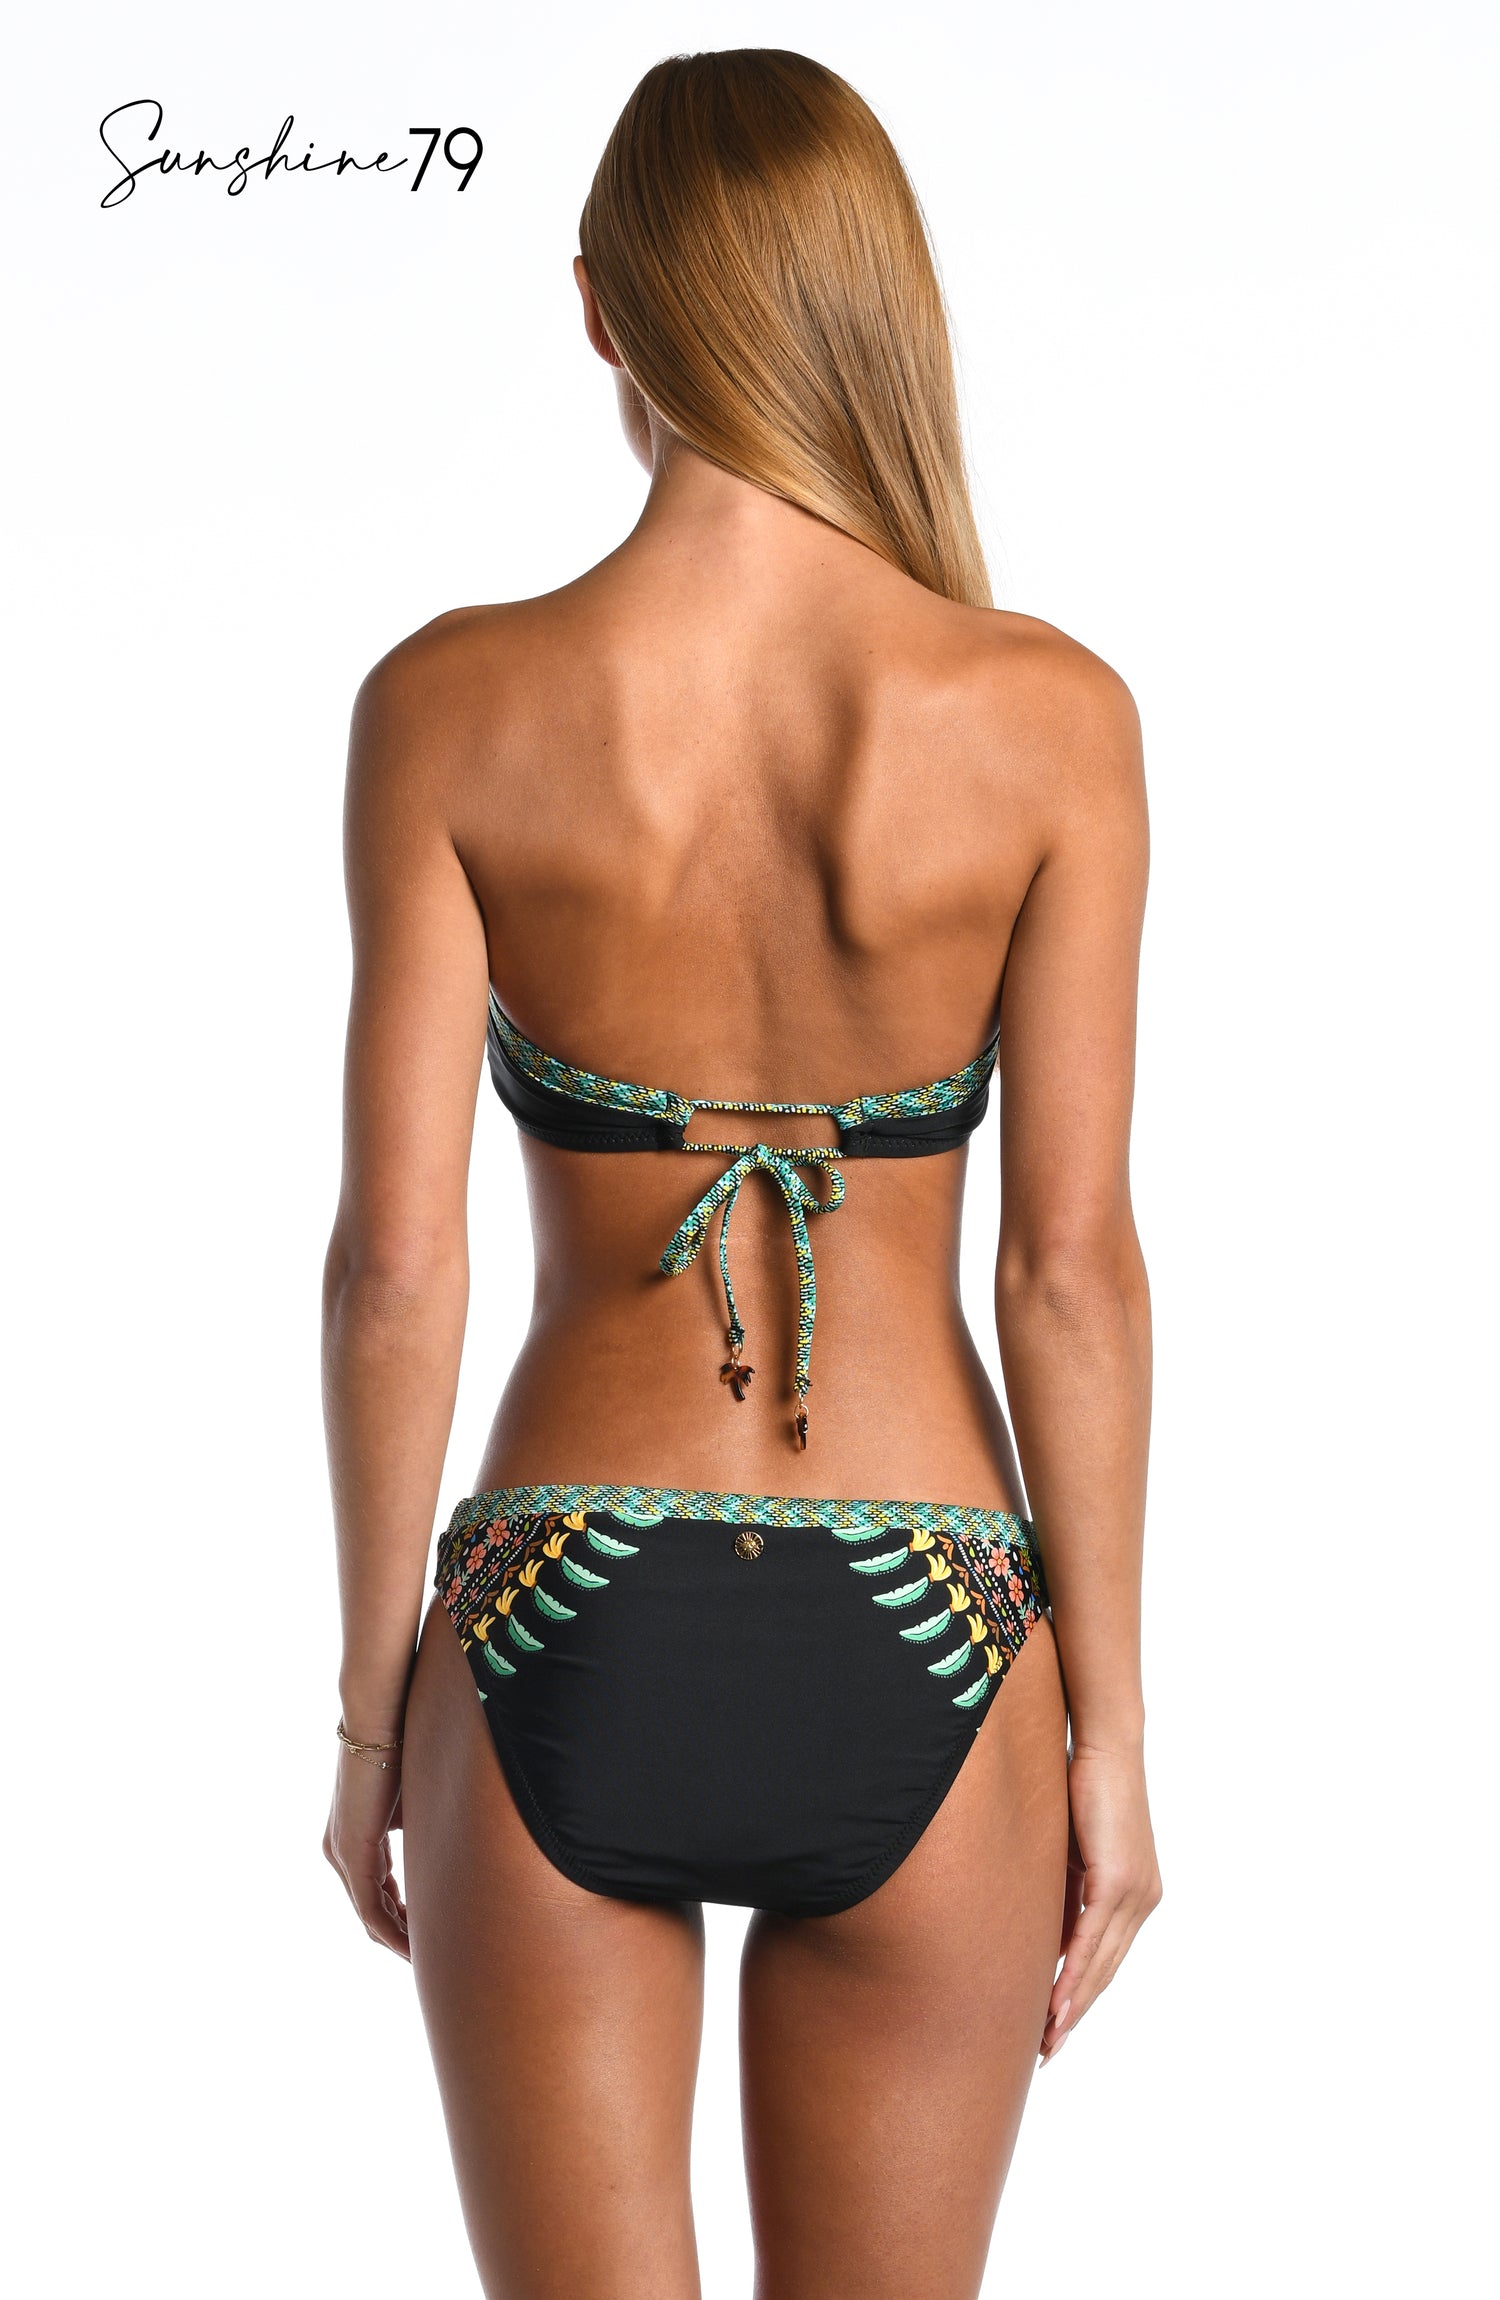 Model is wearing a black multicolored palm tree printed front twist bandeau bikini top from our Sunshine 79 brand.